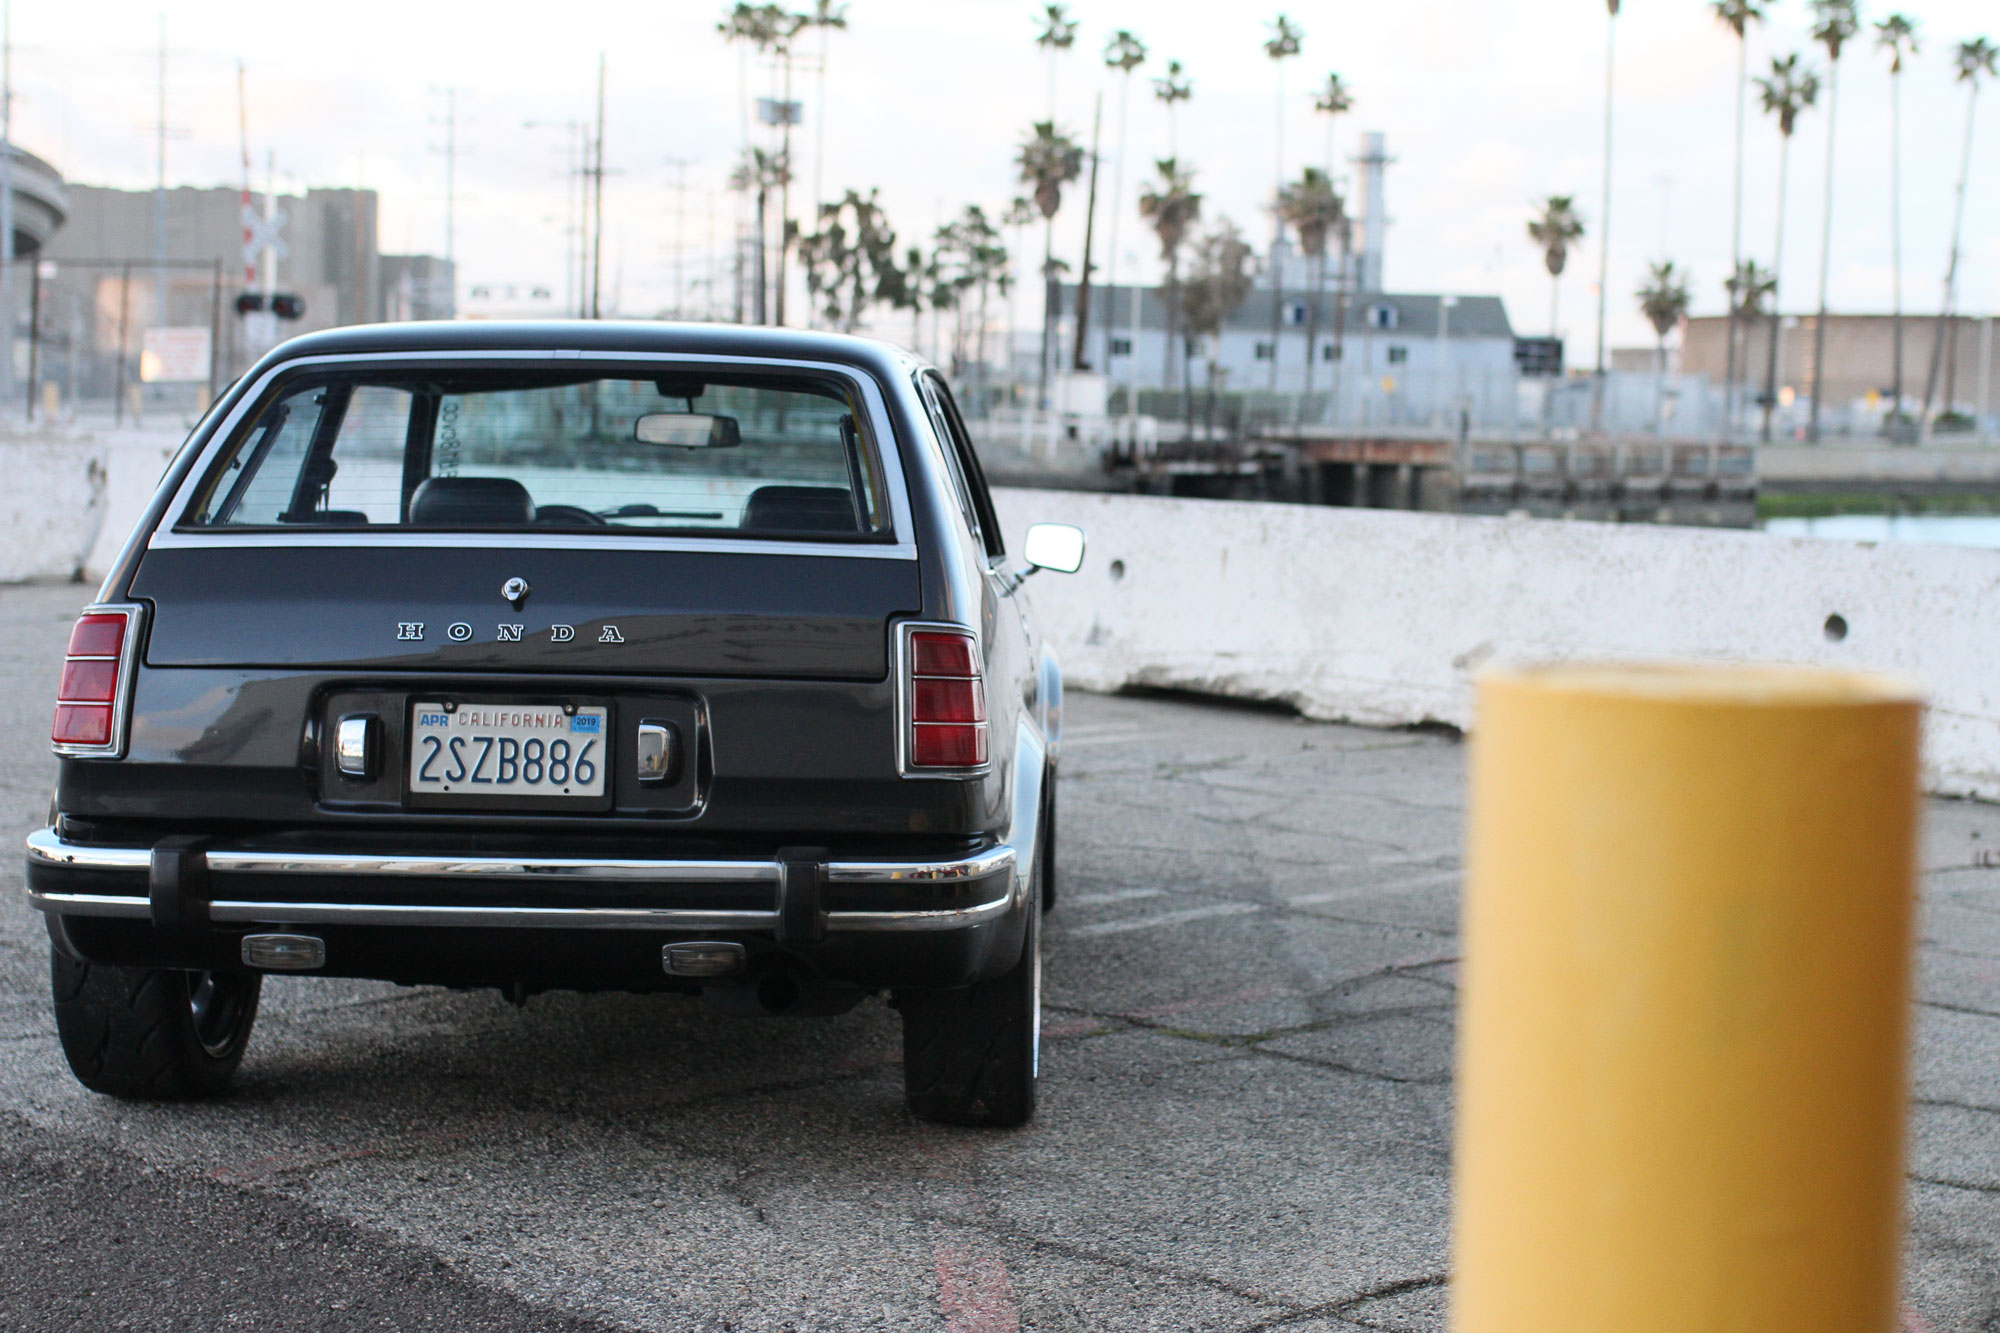 Honda Civic Cvcc from 1978 from behind in Los Angeles